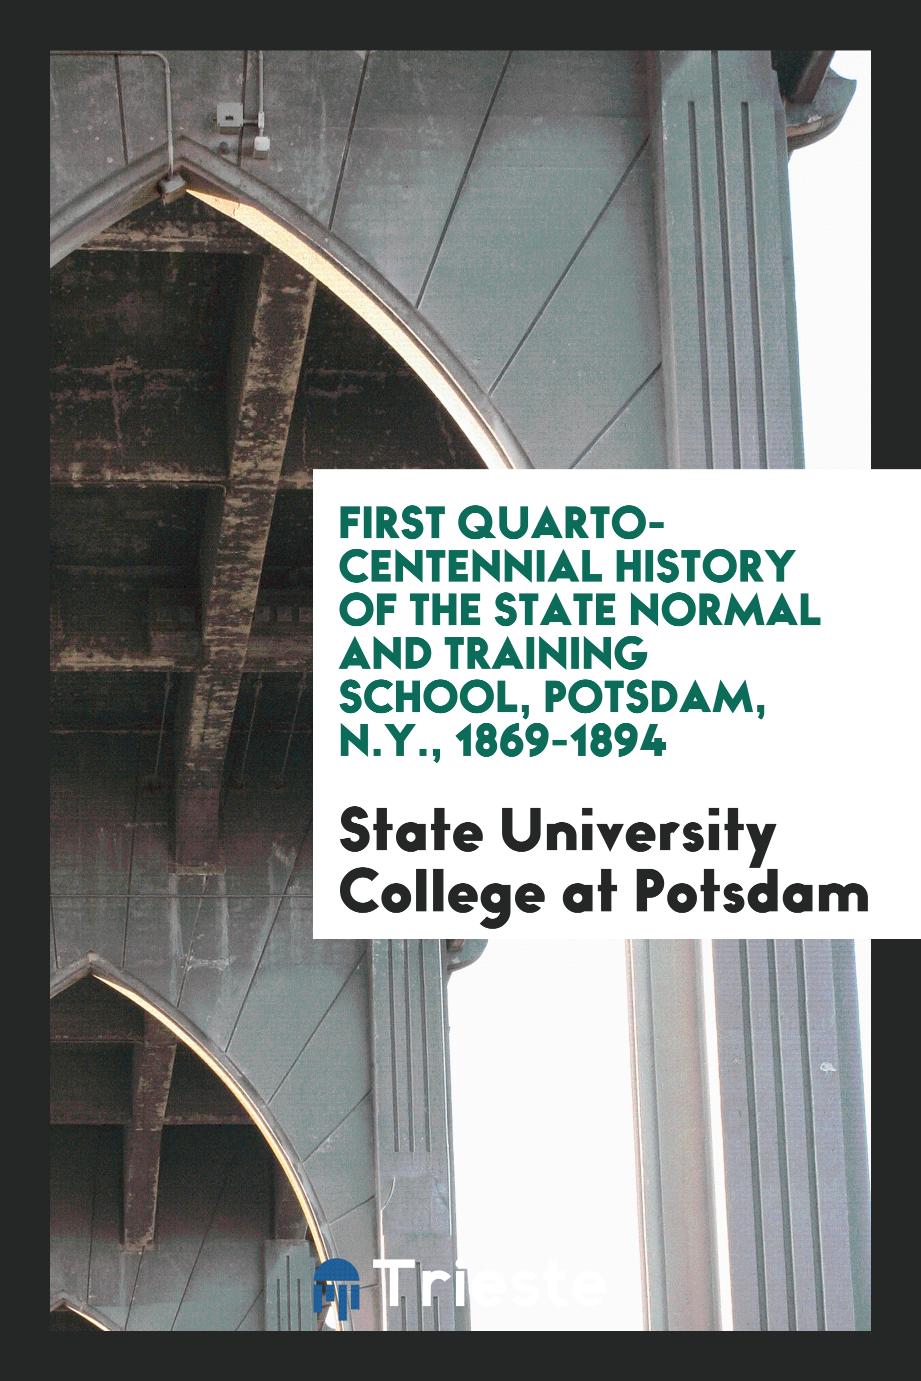 First Quarto-Centennial History of the State Normal and Training School, Potsdam, N.Y., 1869-1894